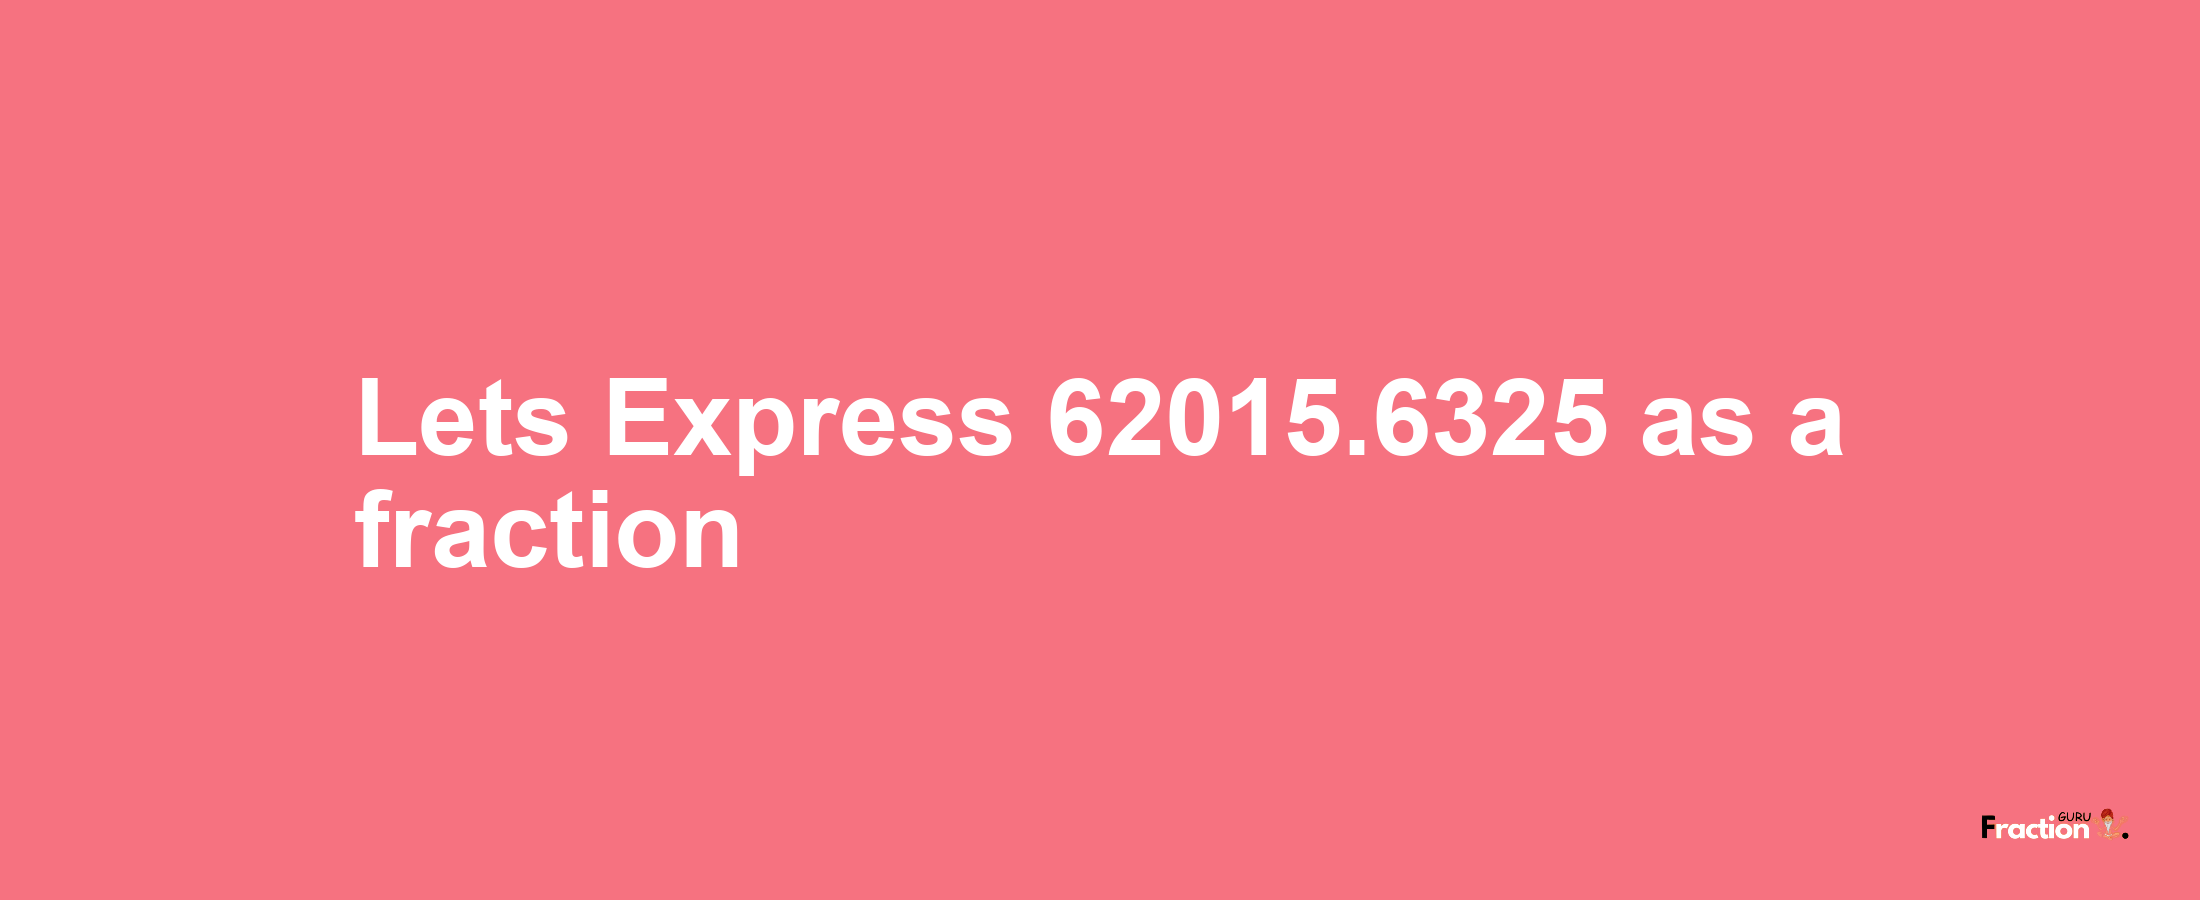 Lets Express 62015.6325 as afraction